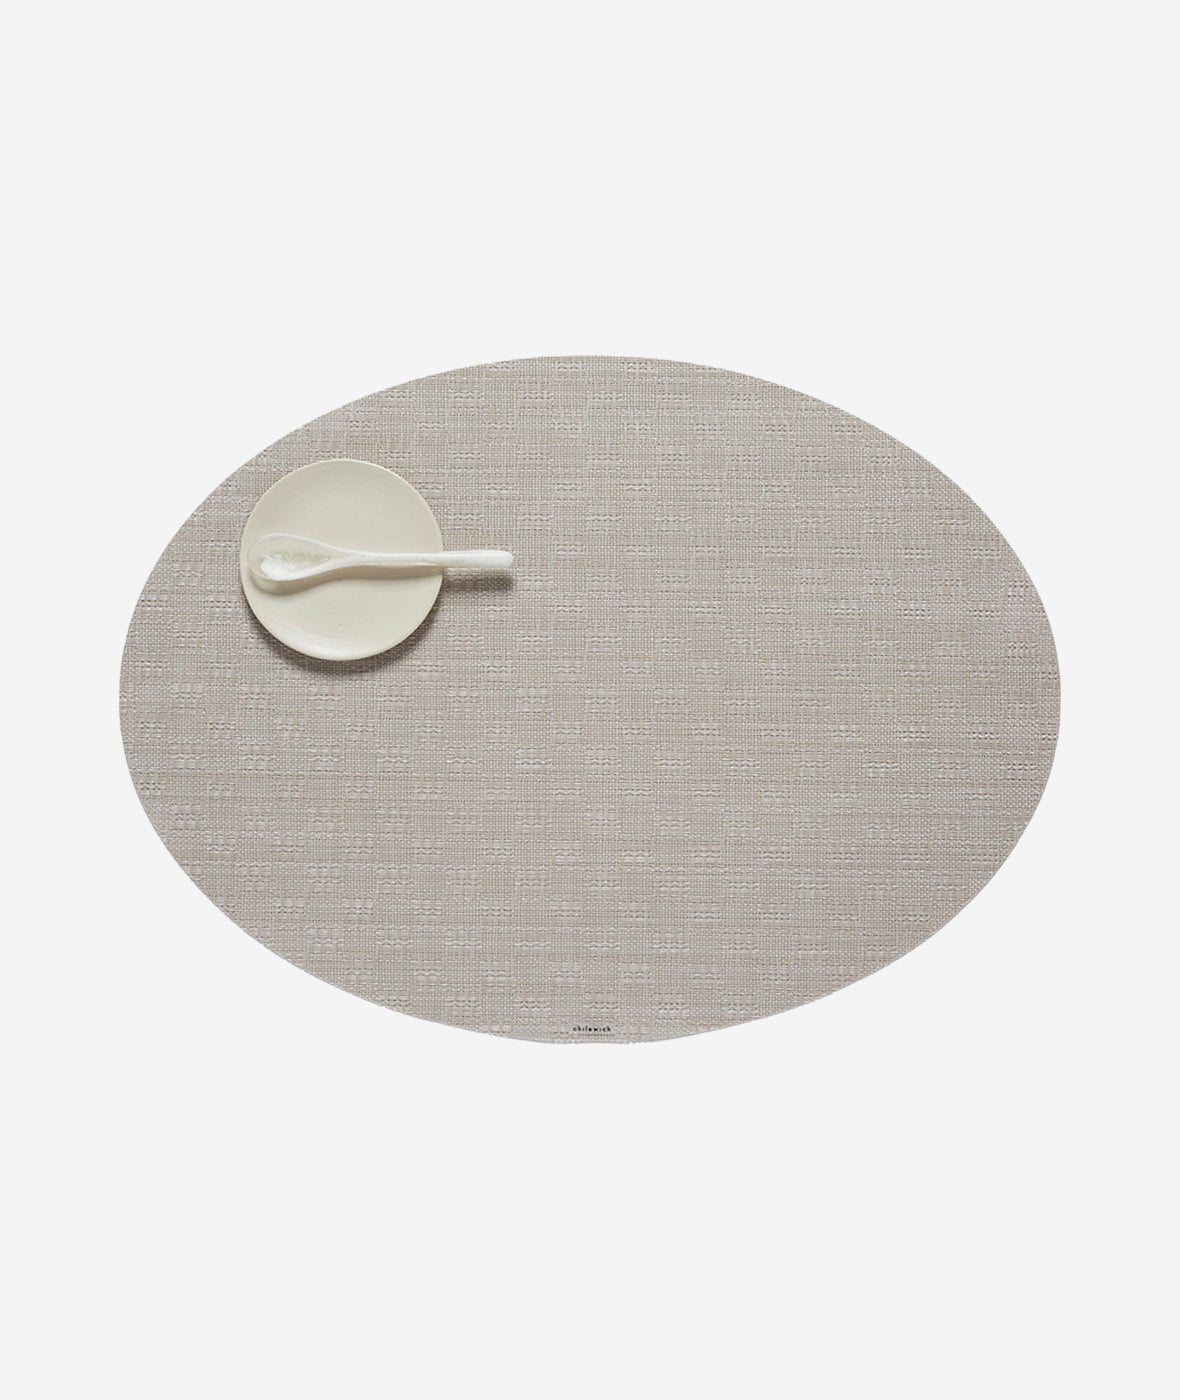 Bay Weave Oval Placemat Set/4 - More Options